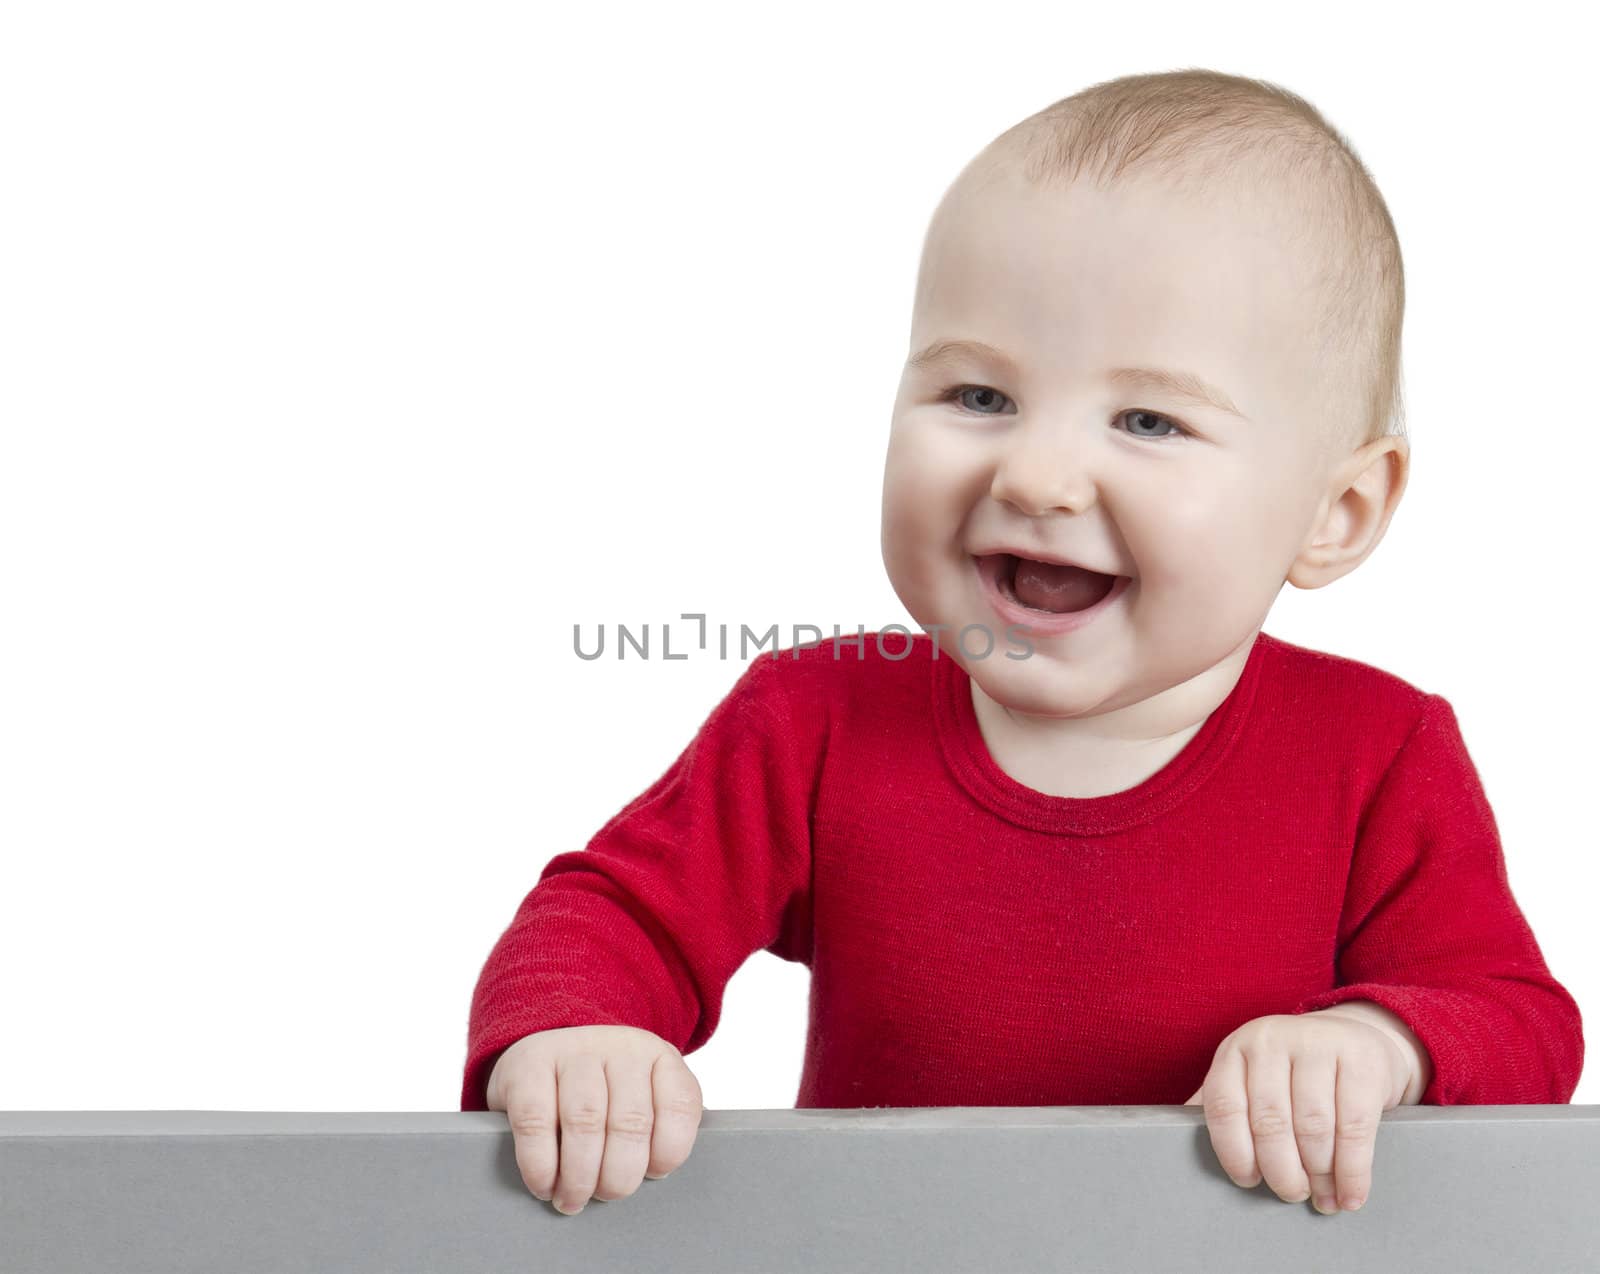 young child with red shirt holding shield. isolate on white background